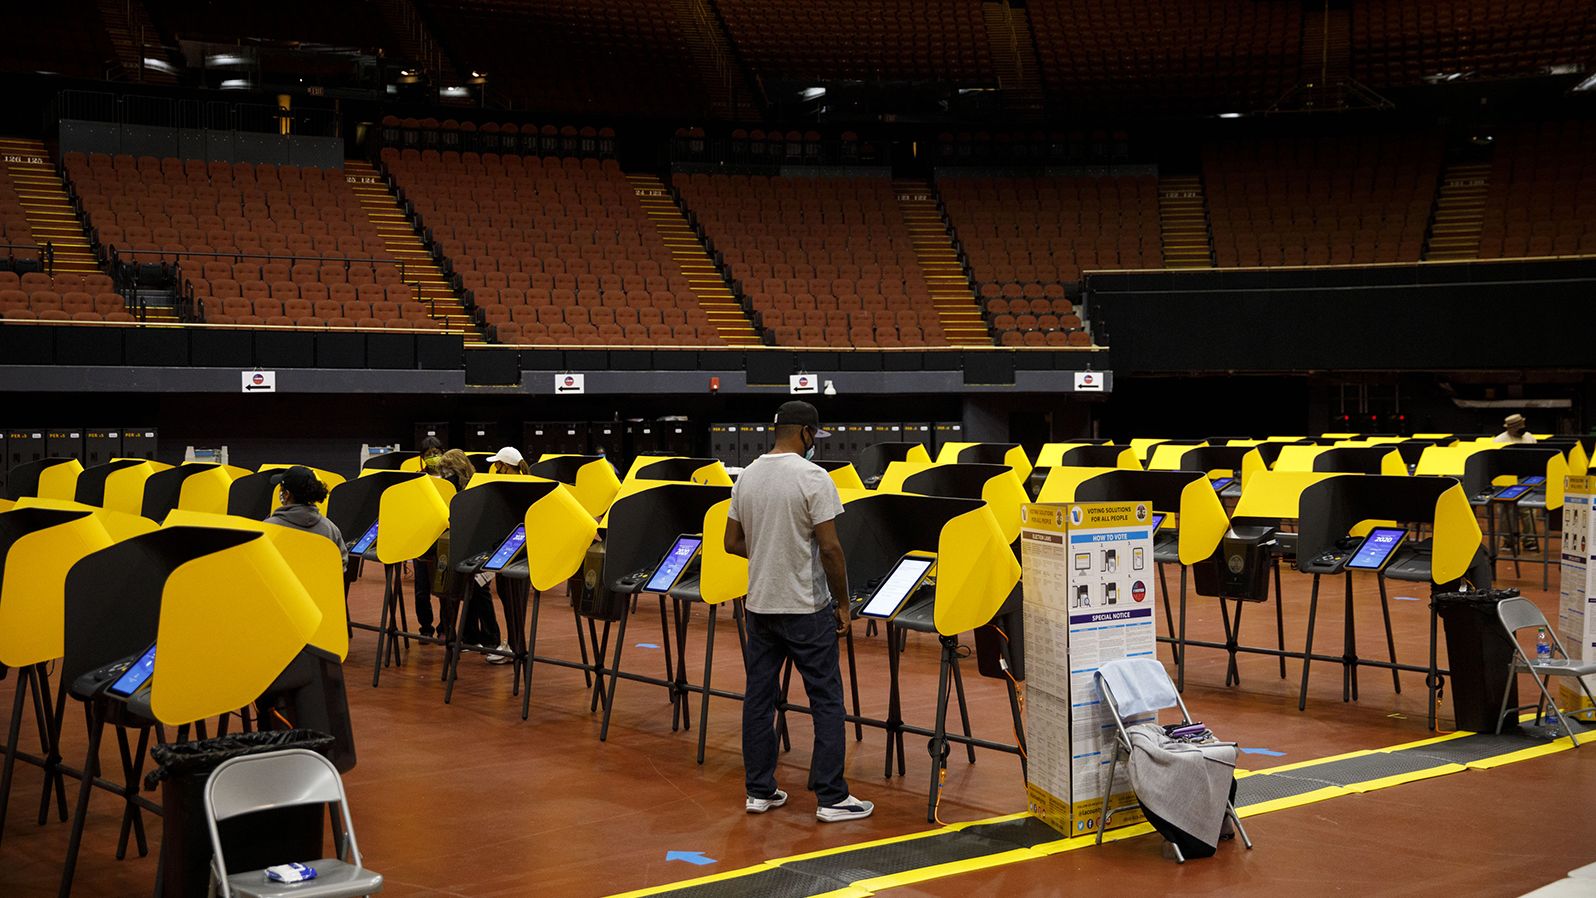 Voters cast ballots at The Forum arena in Inglewood, California.